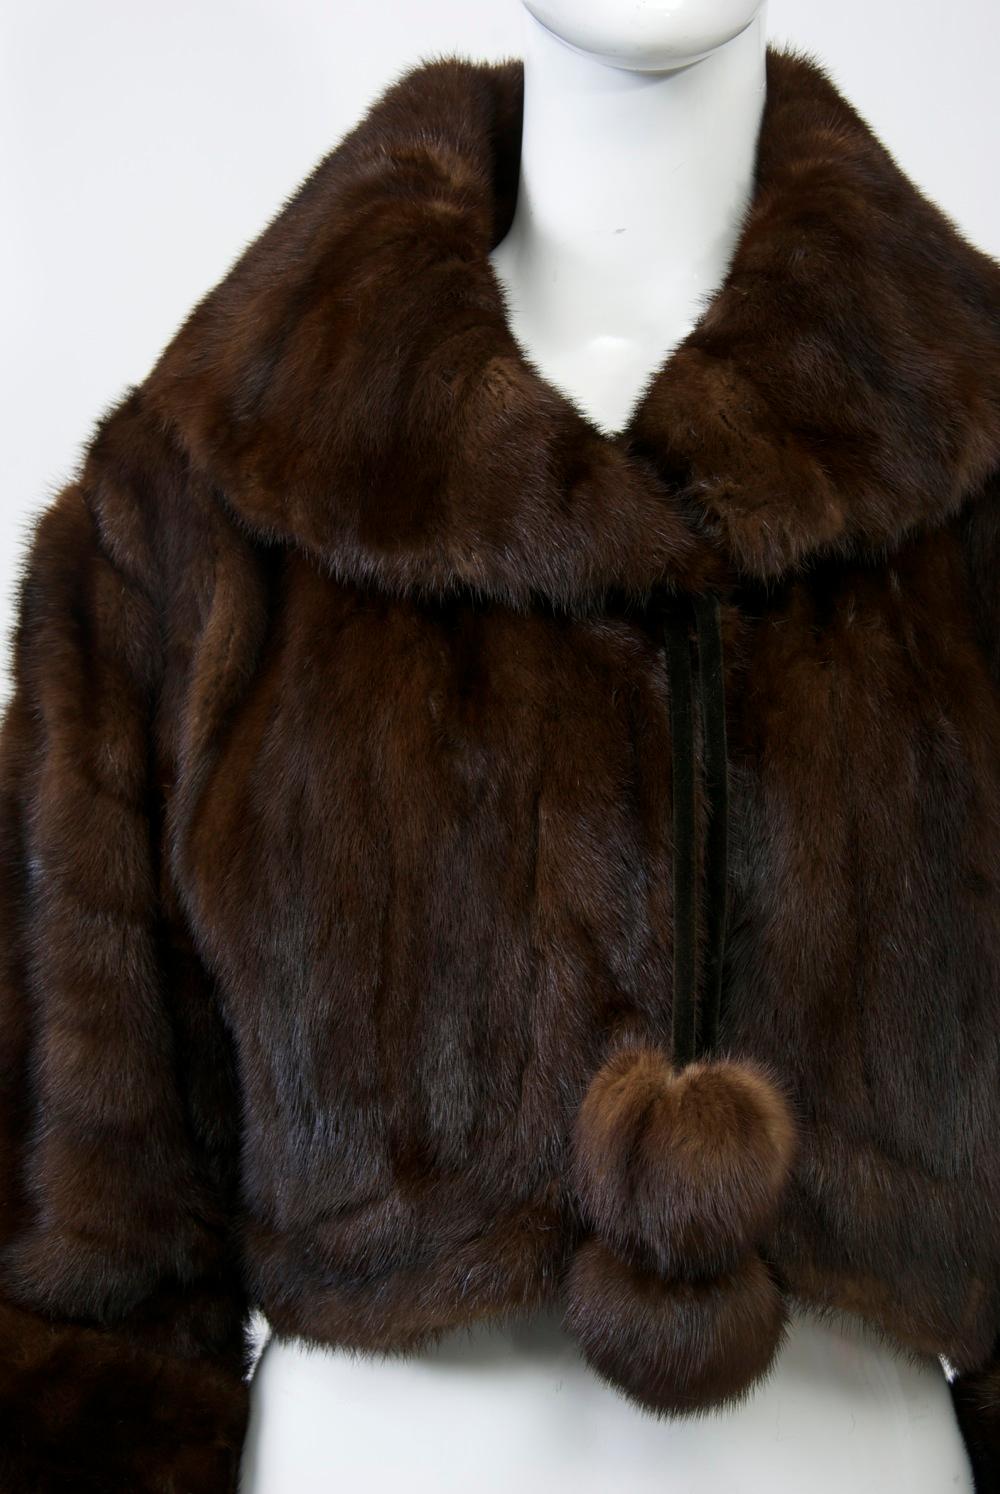 Mahogany mink waist-length jacket with shawl collar and sleeves that can be turned back with cuffs or let down for full length. Velvet cords terminating in mink spheres tie under the collar to hold the jacket closed. New silk charmeuse lining.